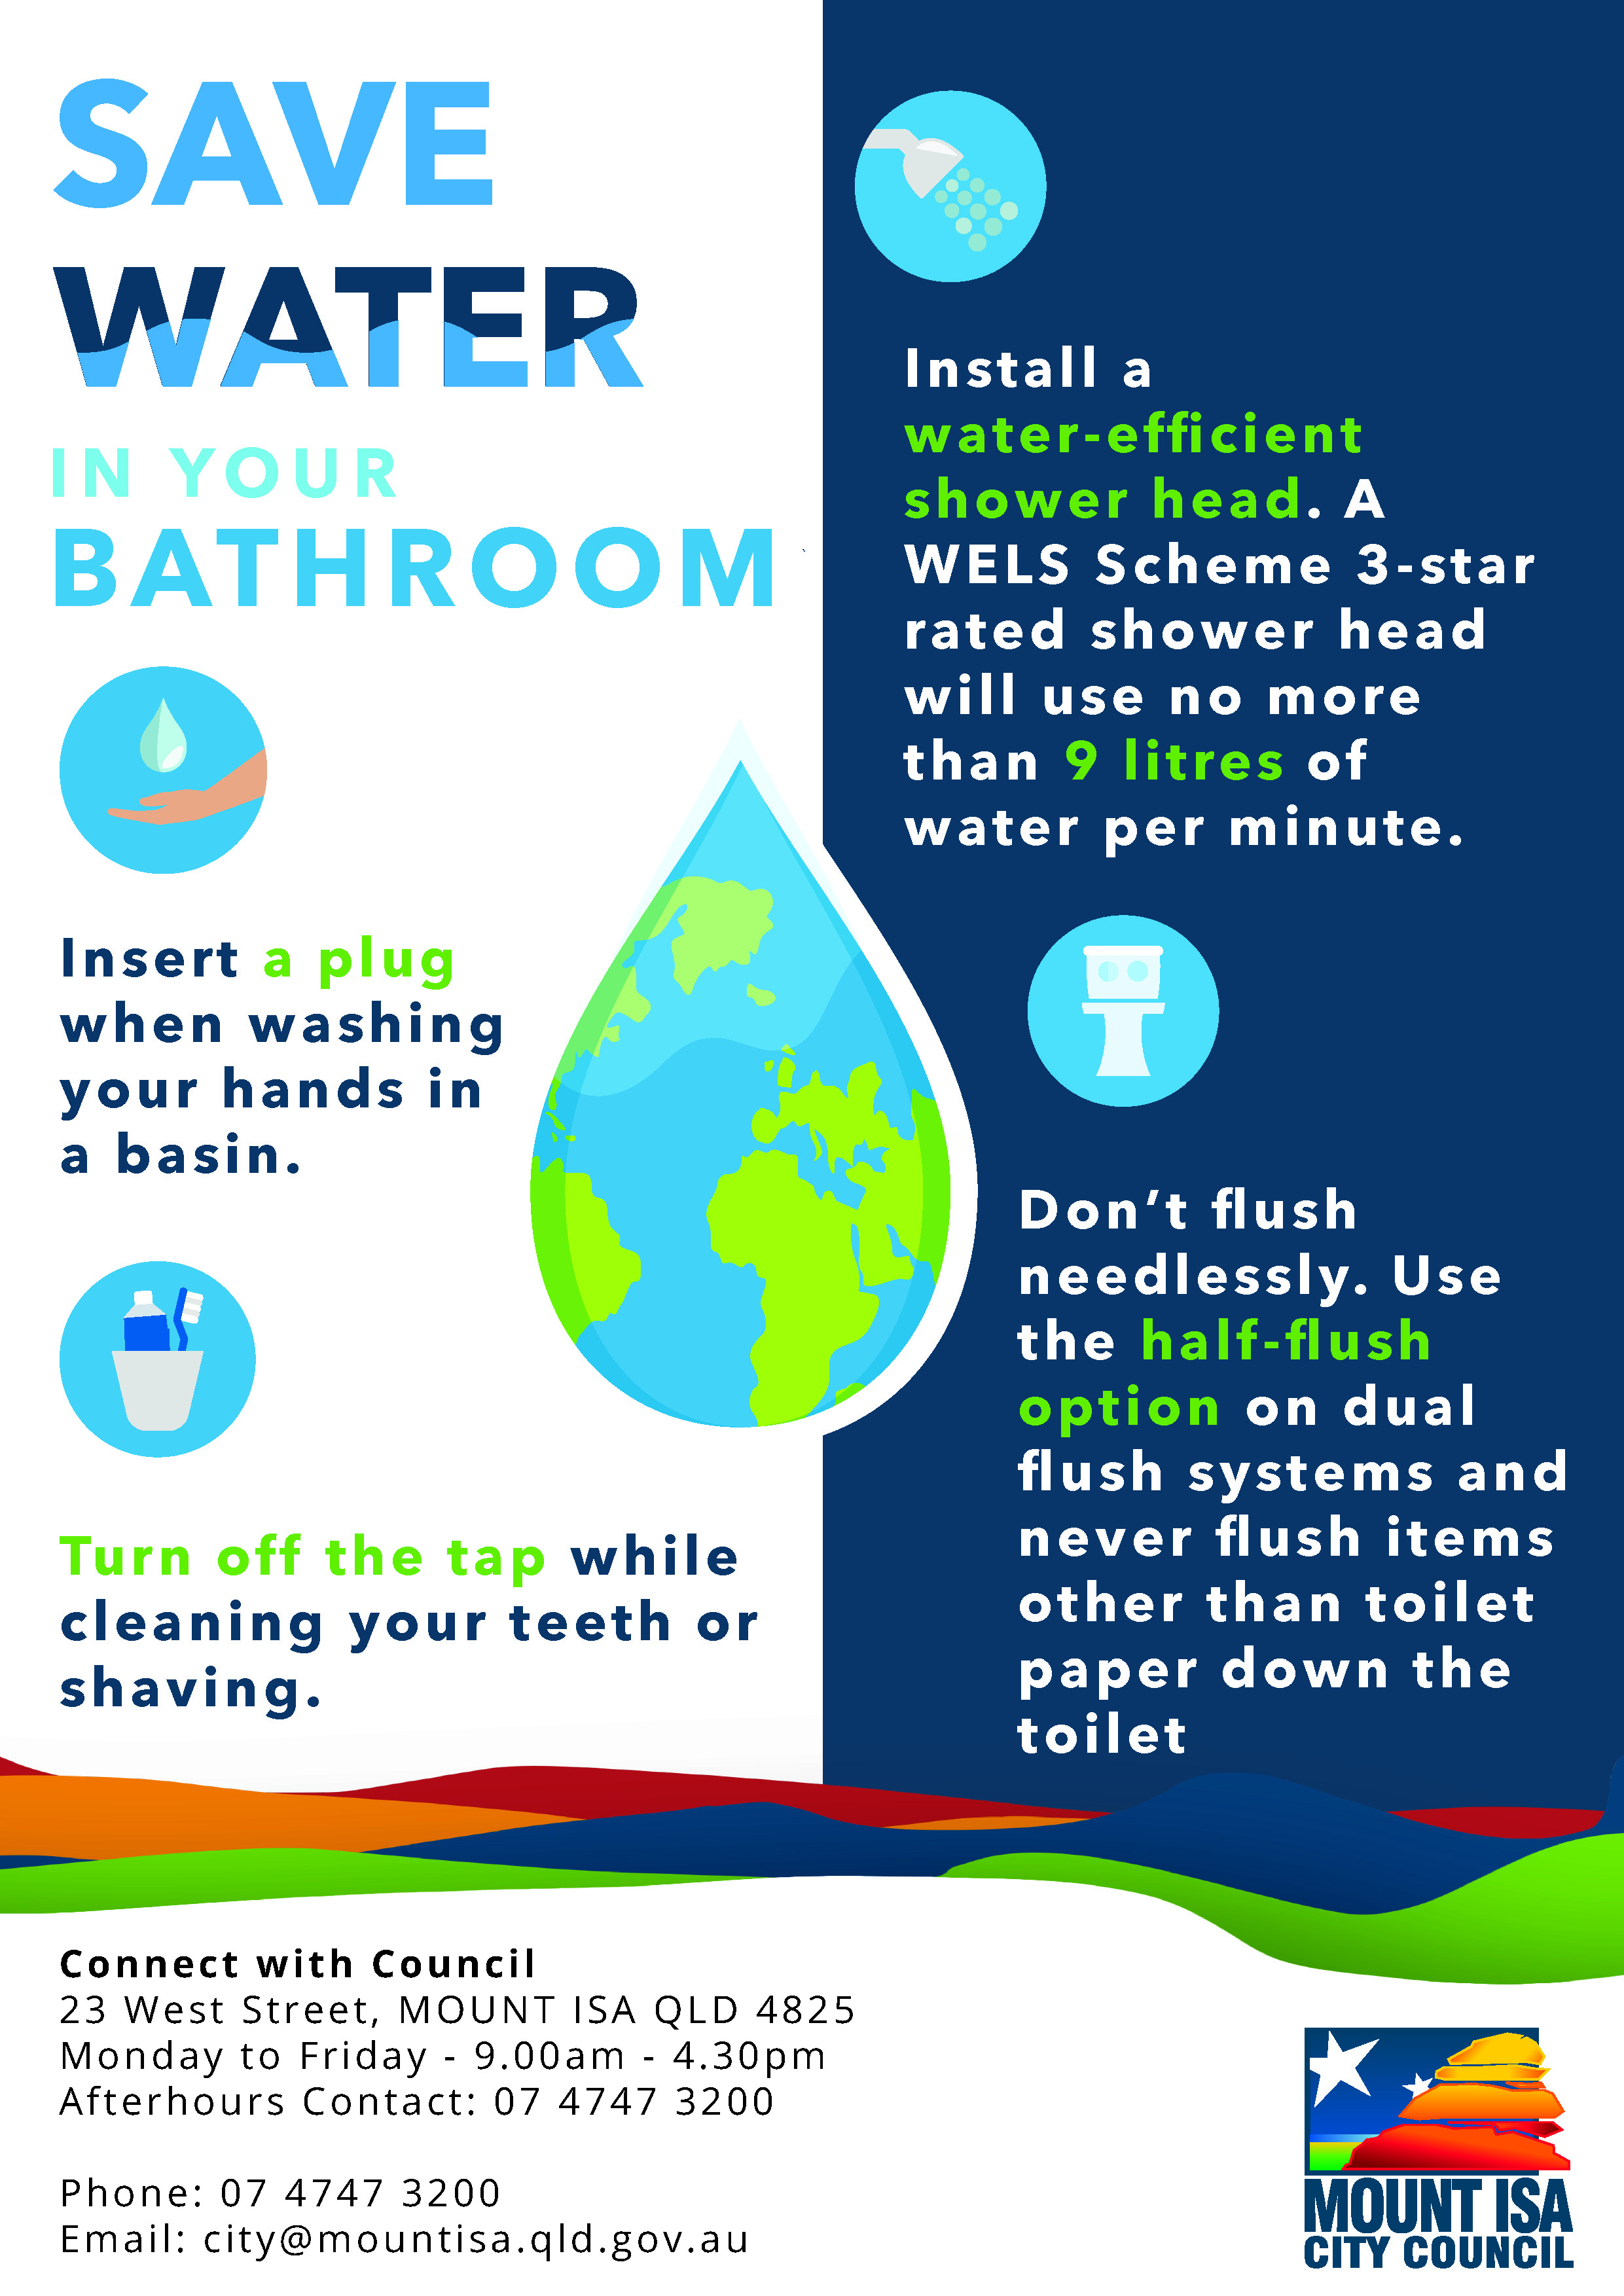 Save Water in your Bathroom